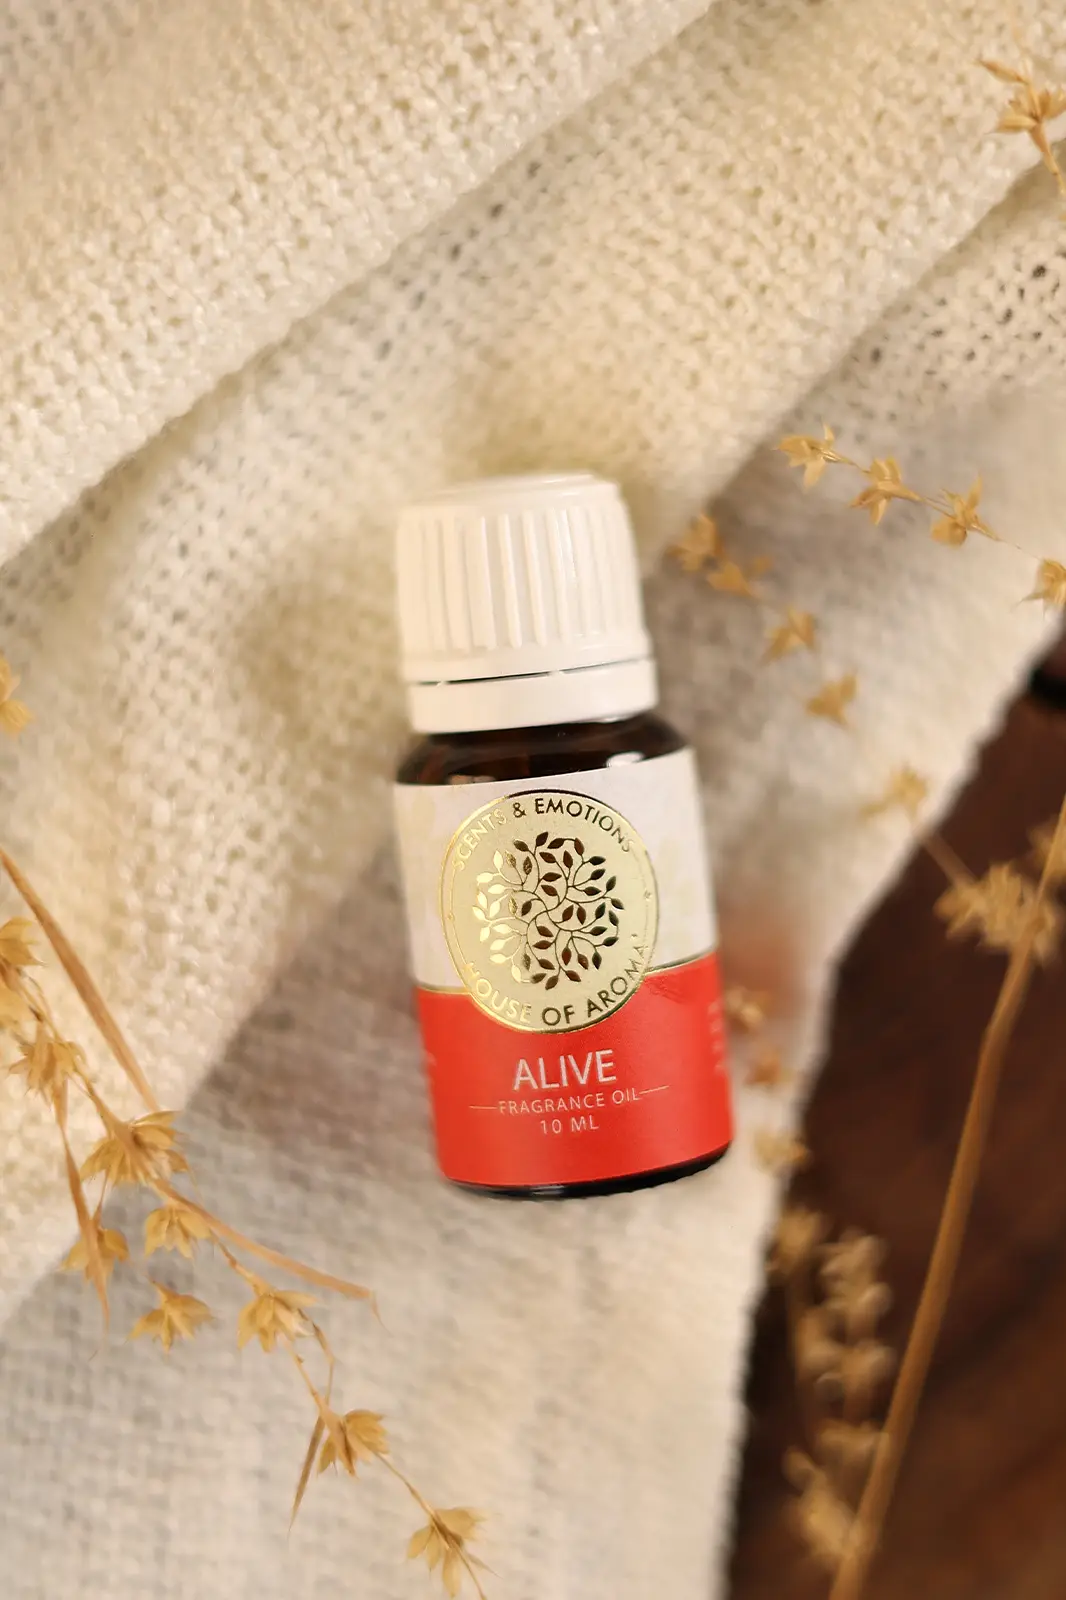 alive fragrance oil 100ml, Fragrance Oil, Aroma oil, Synthetic oils, Fragrance oil for candles, oil for diffusers, Aromatic oil, Candle oil, Aromatherapy oil, oil manufacturers, House of Aroma, alive fragrance oil, fragrance oil for candles, floral scents, alive oil, alive scented oil, alive aroma oil, alive oil benefits, alive oil uses, alive fragrance oil, fragrance brands in India